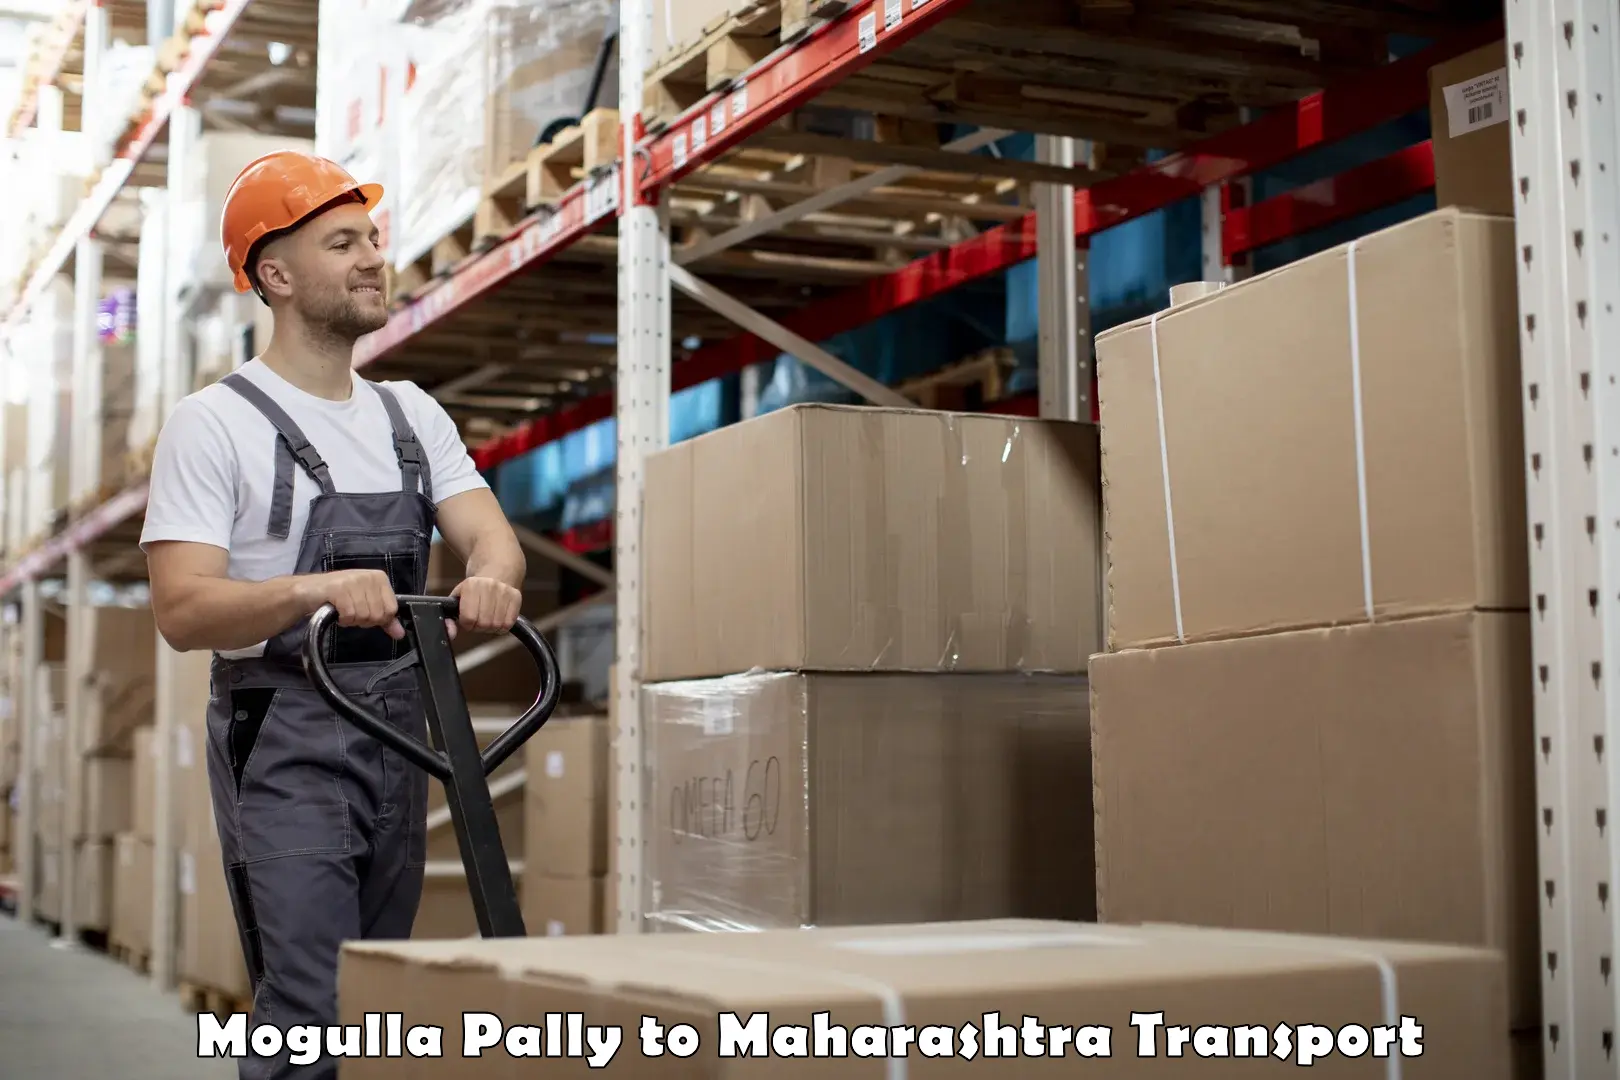 Parcel transport services in Mogulla Pally to Akkalkot